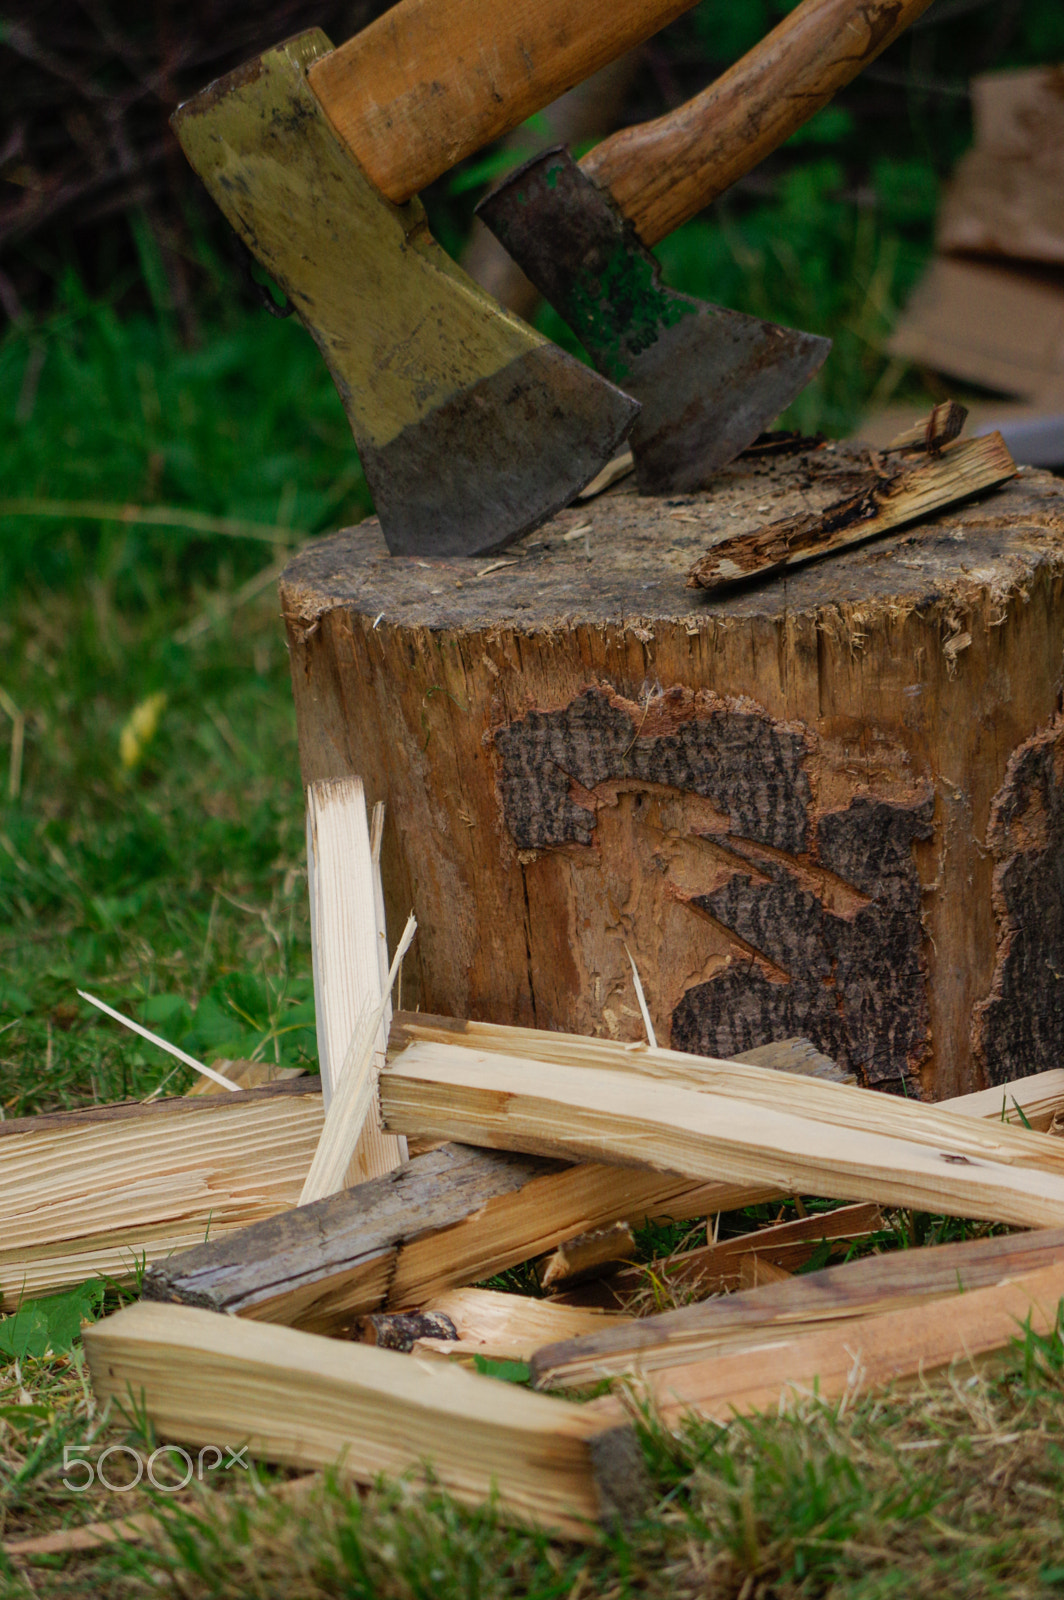 Pentax K-3 + smc Pentax-DA L 50-200mm F4-5.6 ED WR sample photo. Two ax in stump with wood crest on a background of green grass and firewood photography